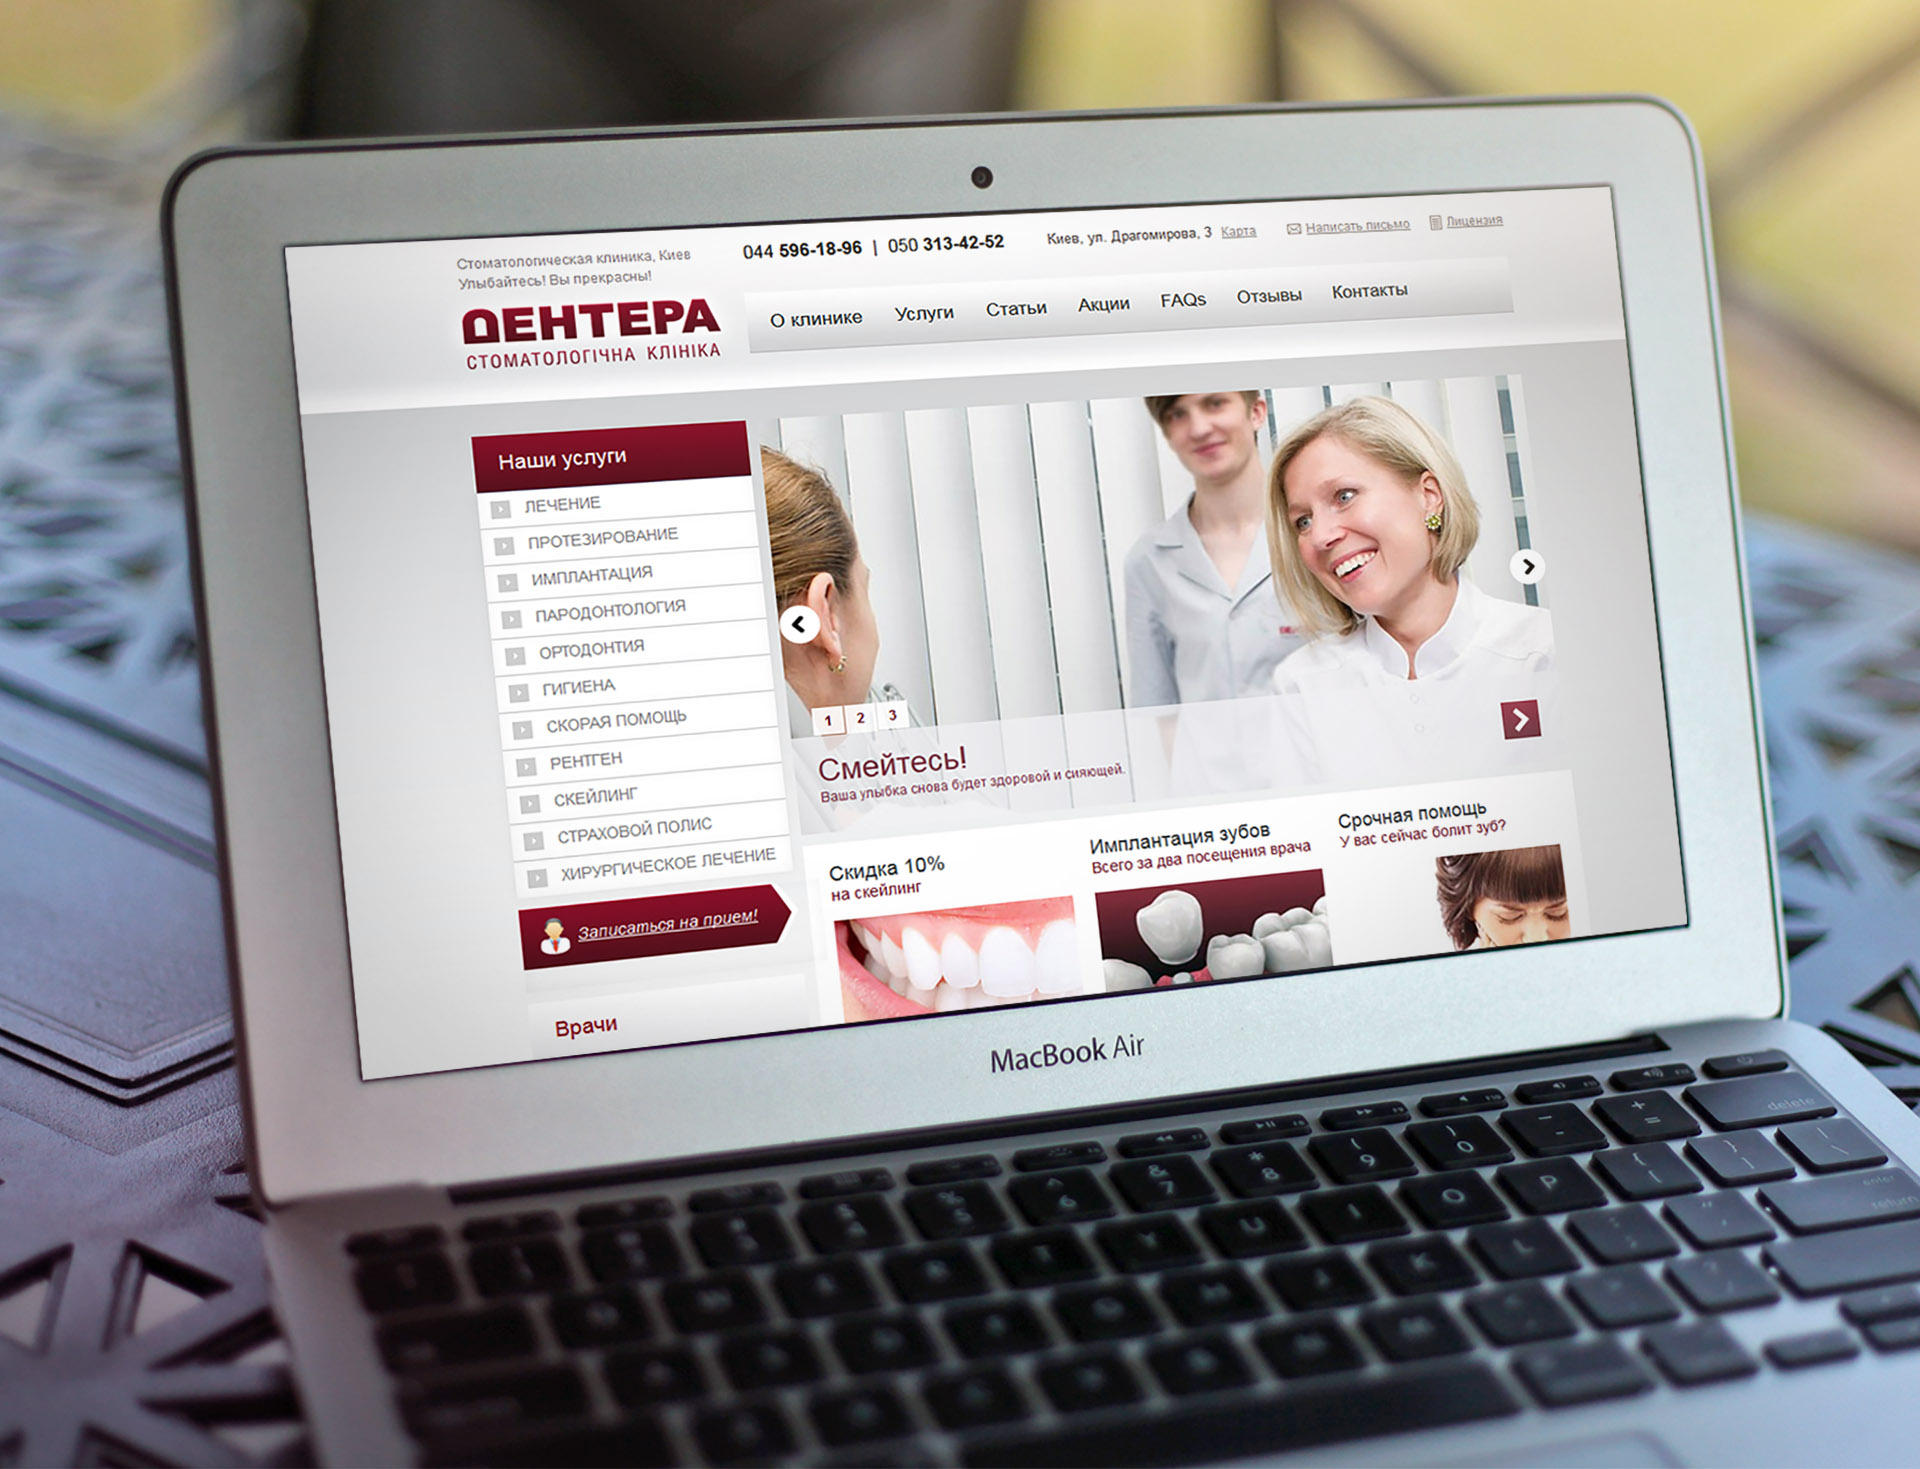 Дизайн of the website of the dental clinic